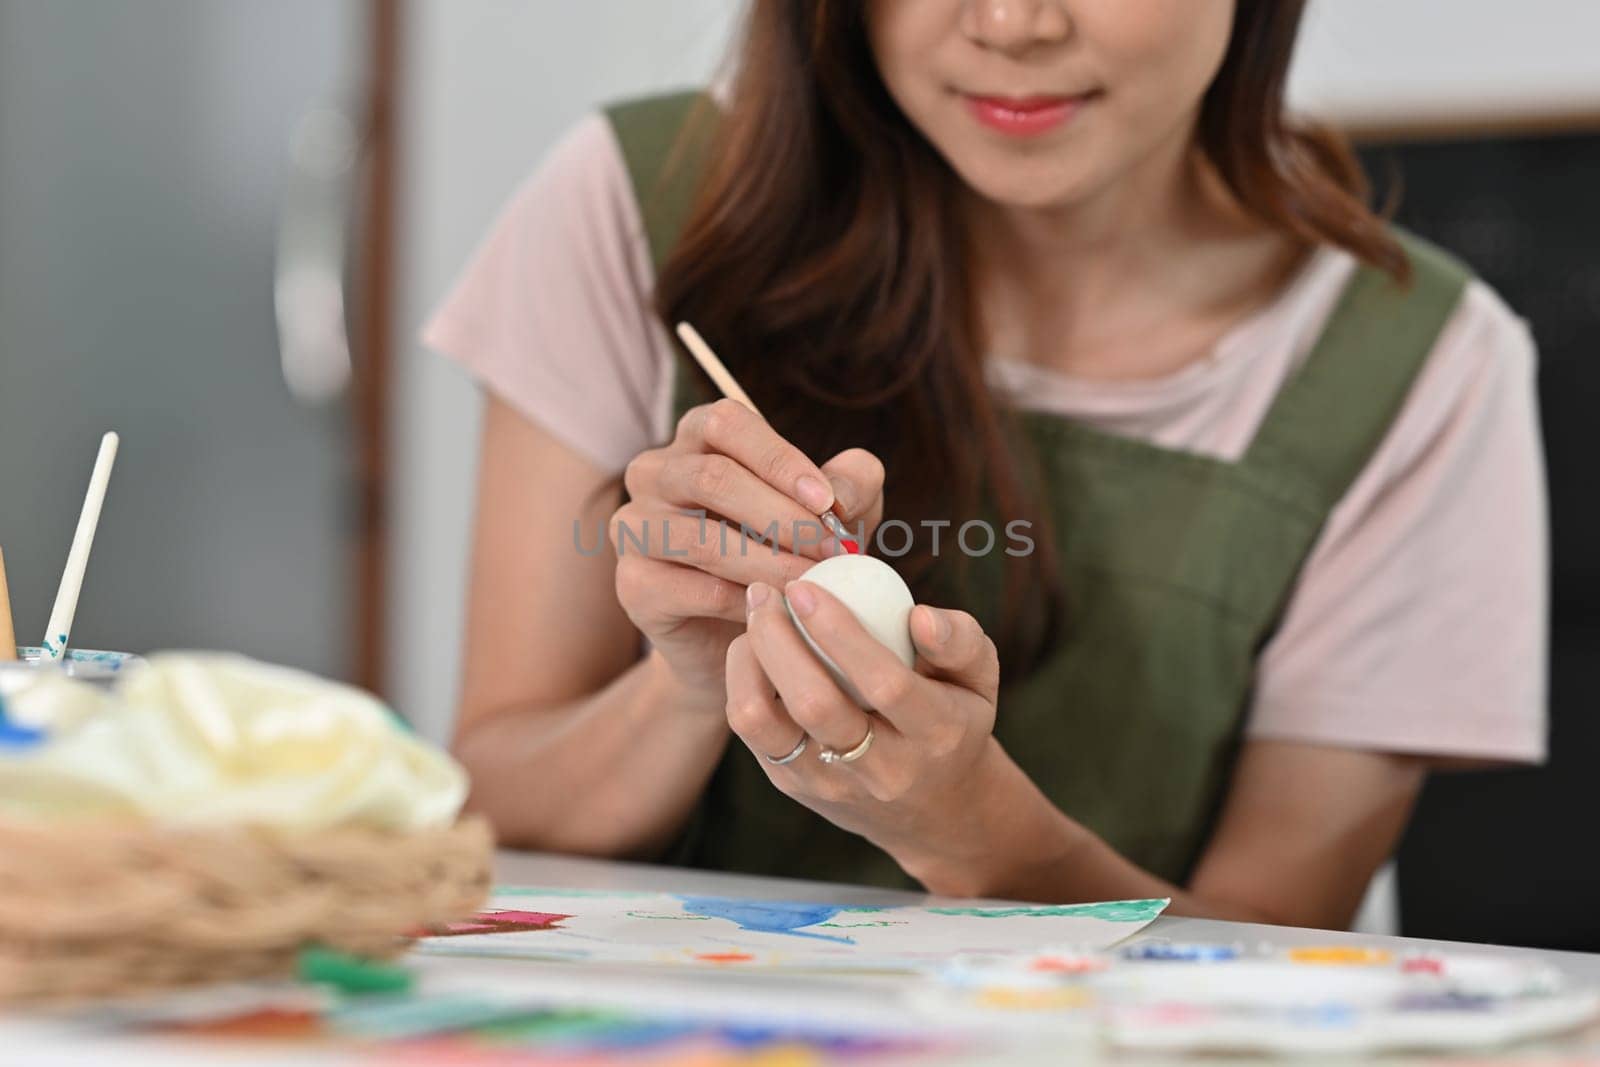 Smiling young woman in apron painting Easter egg with brush at table. Preparing for Easter concept.